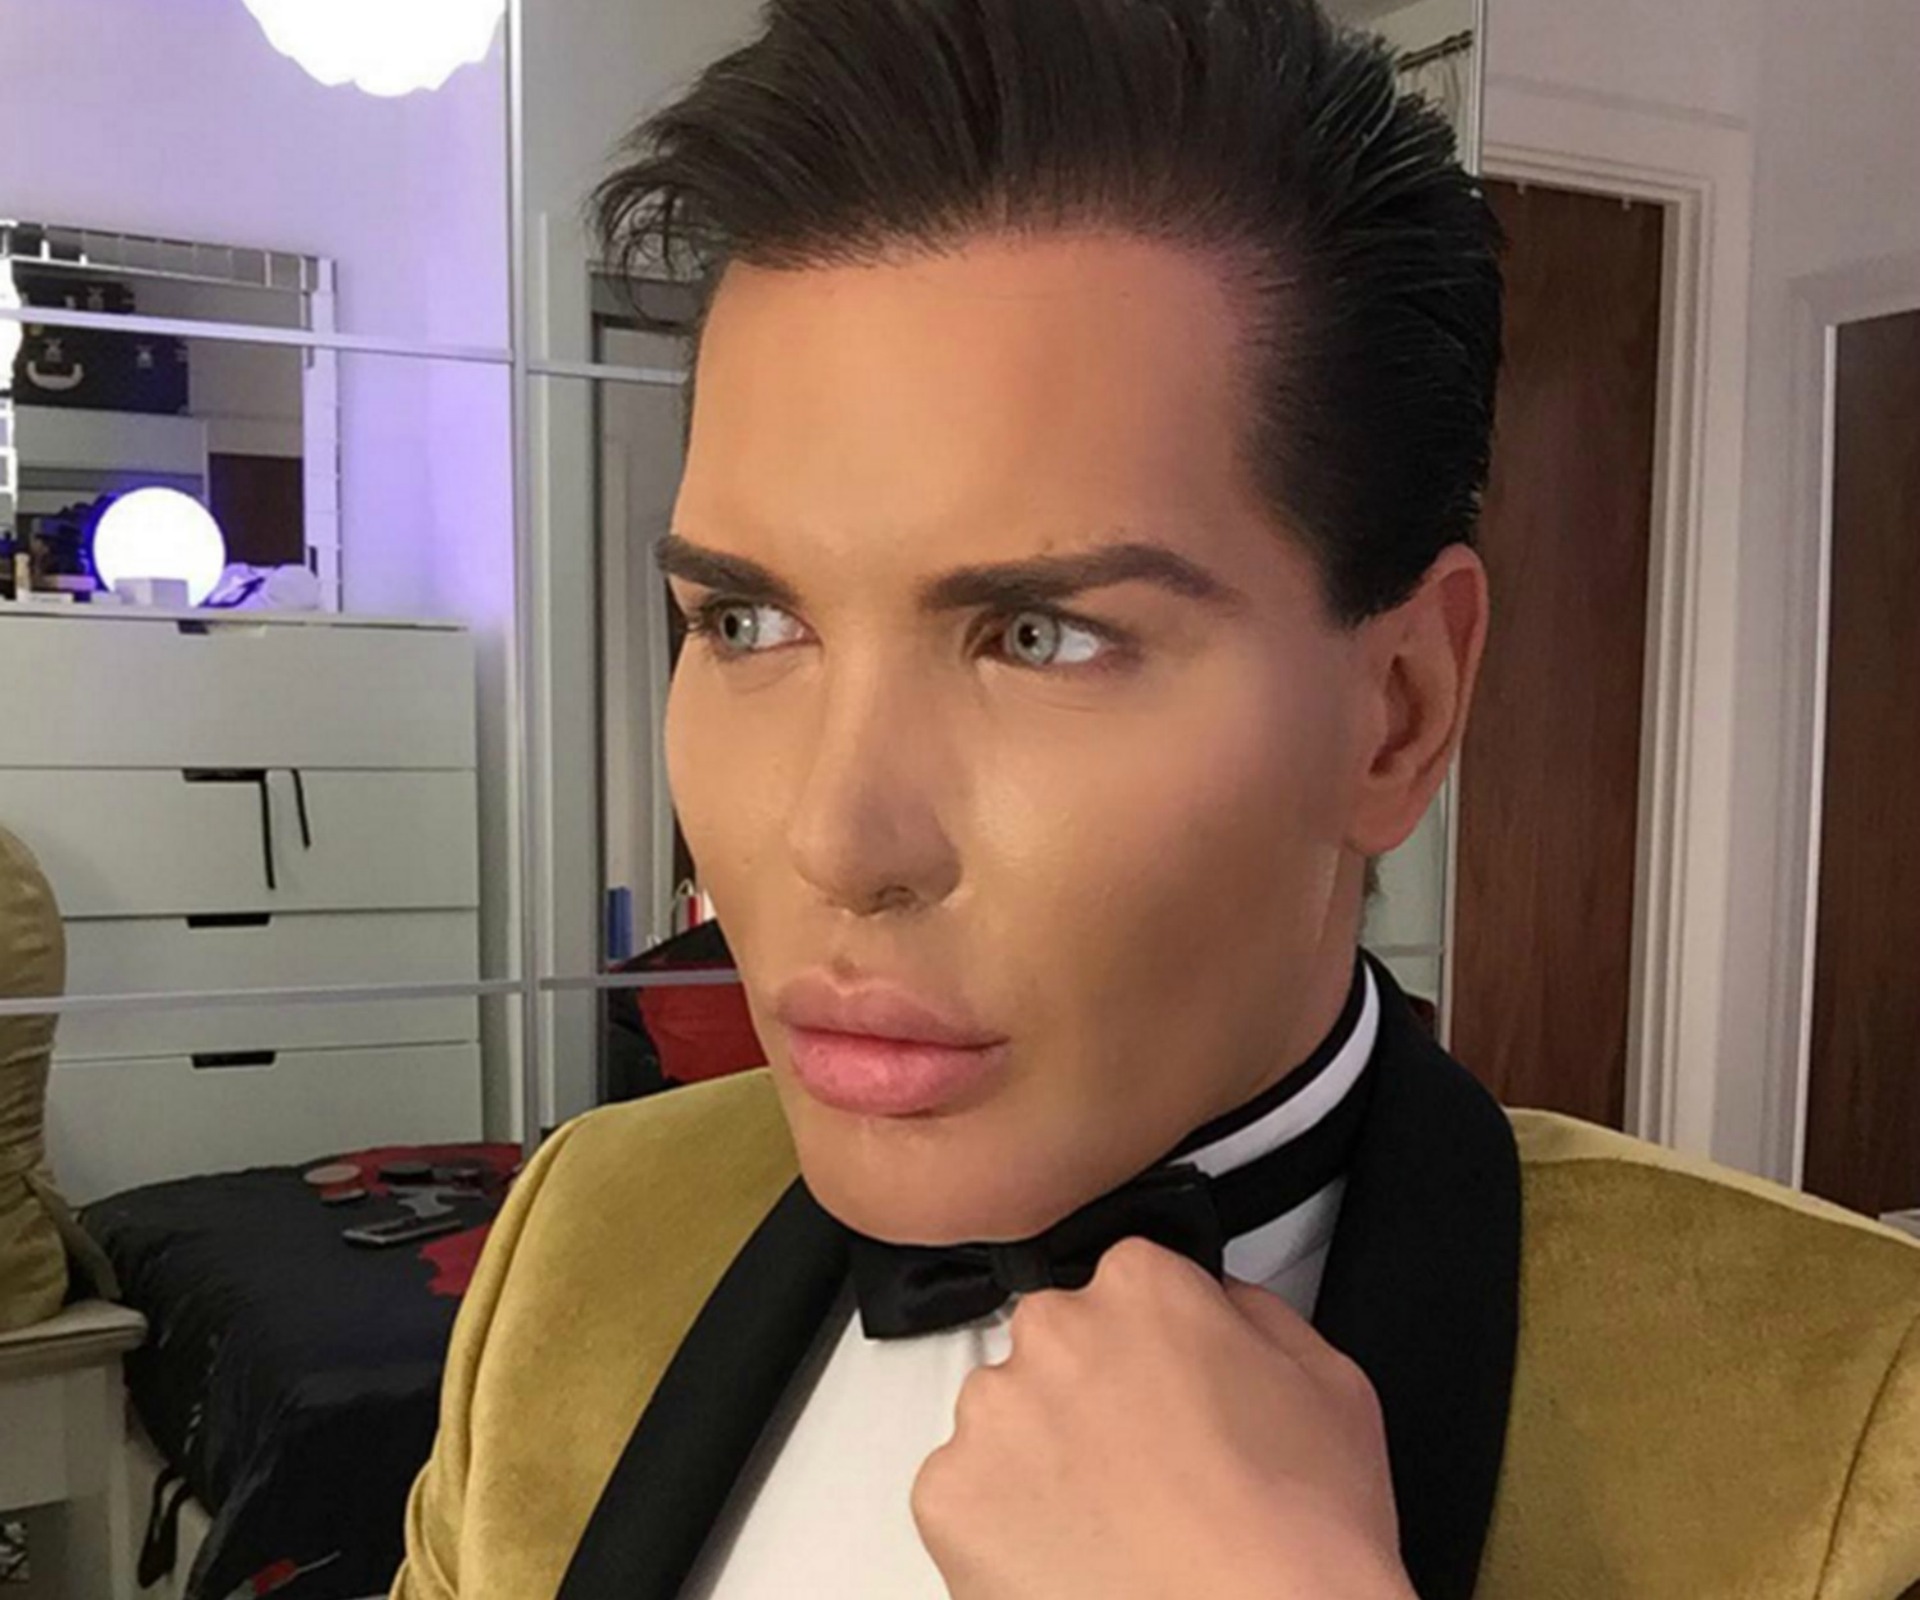 Real-life Ken doll rushed to hospital after face begins to collapse